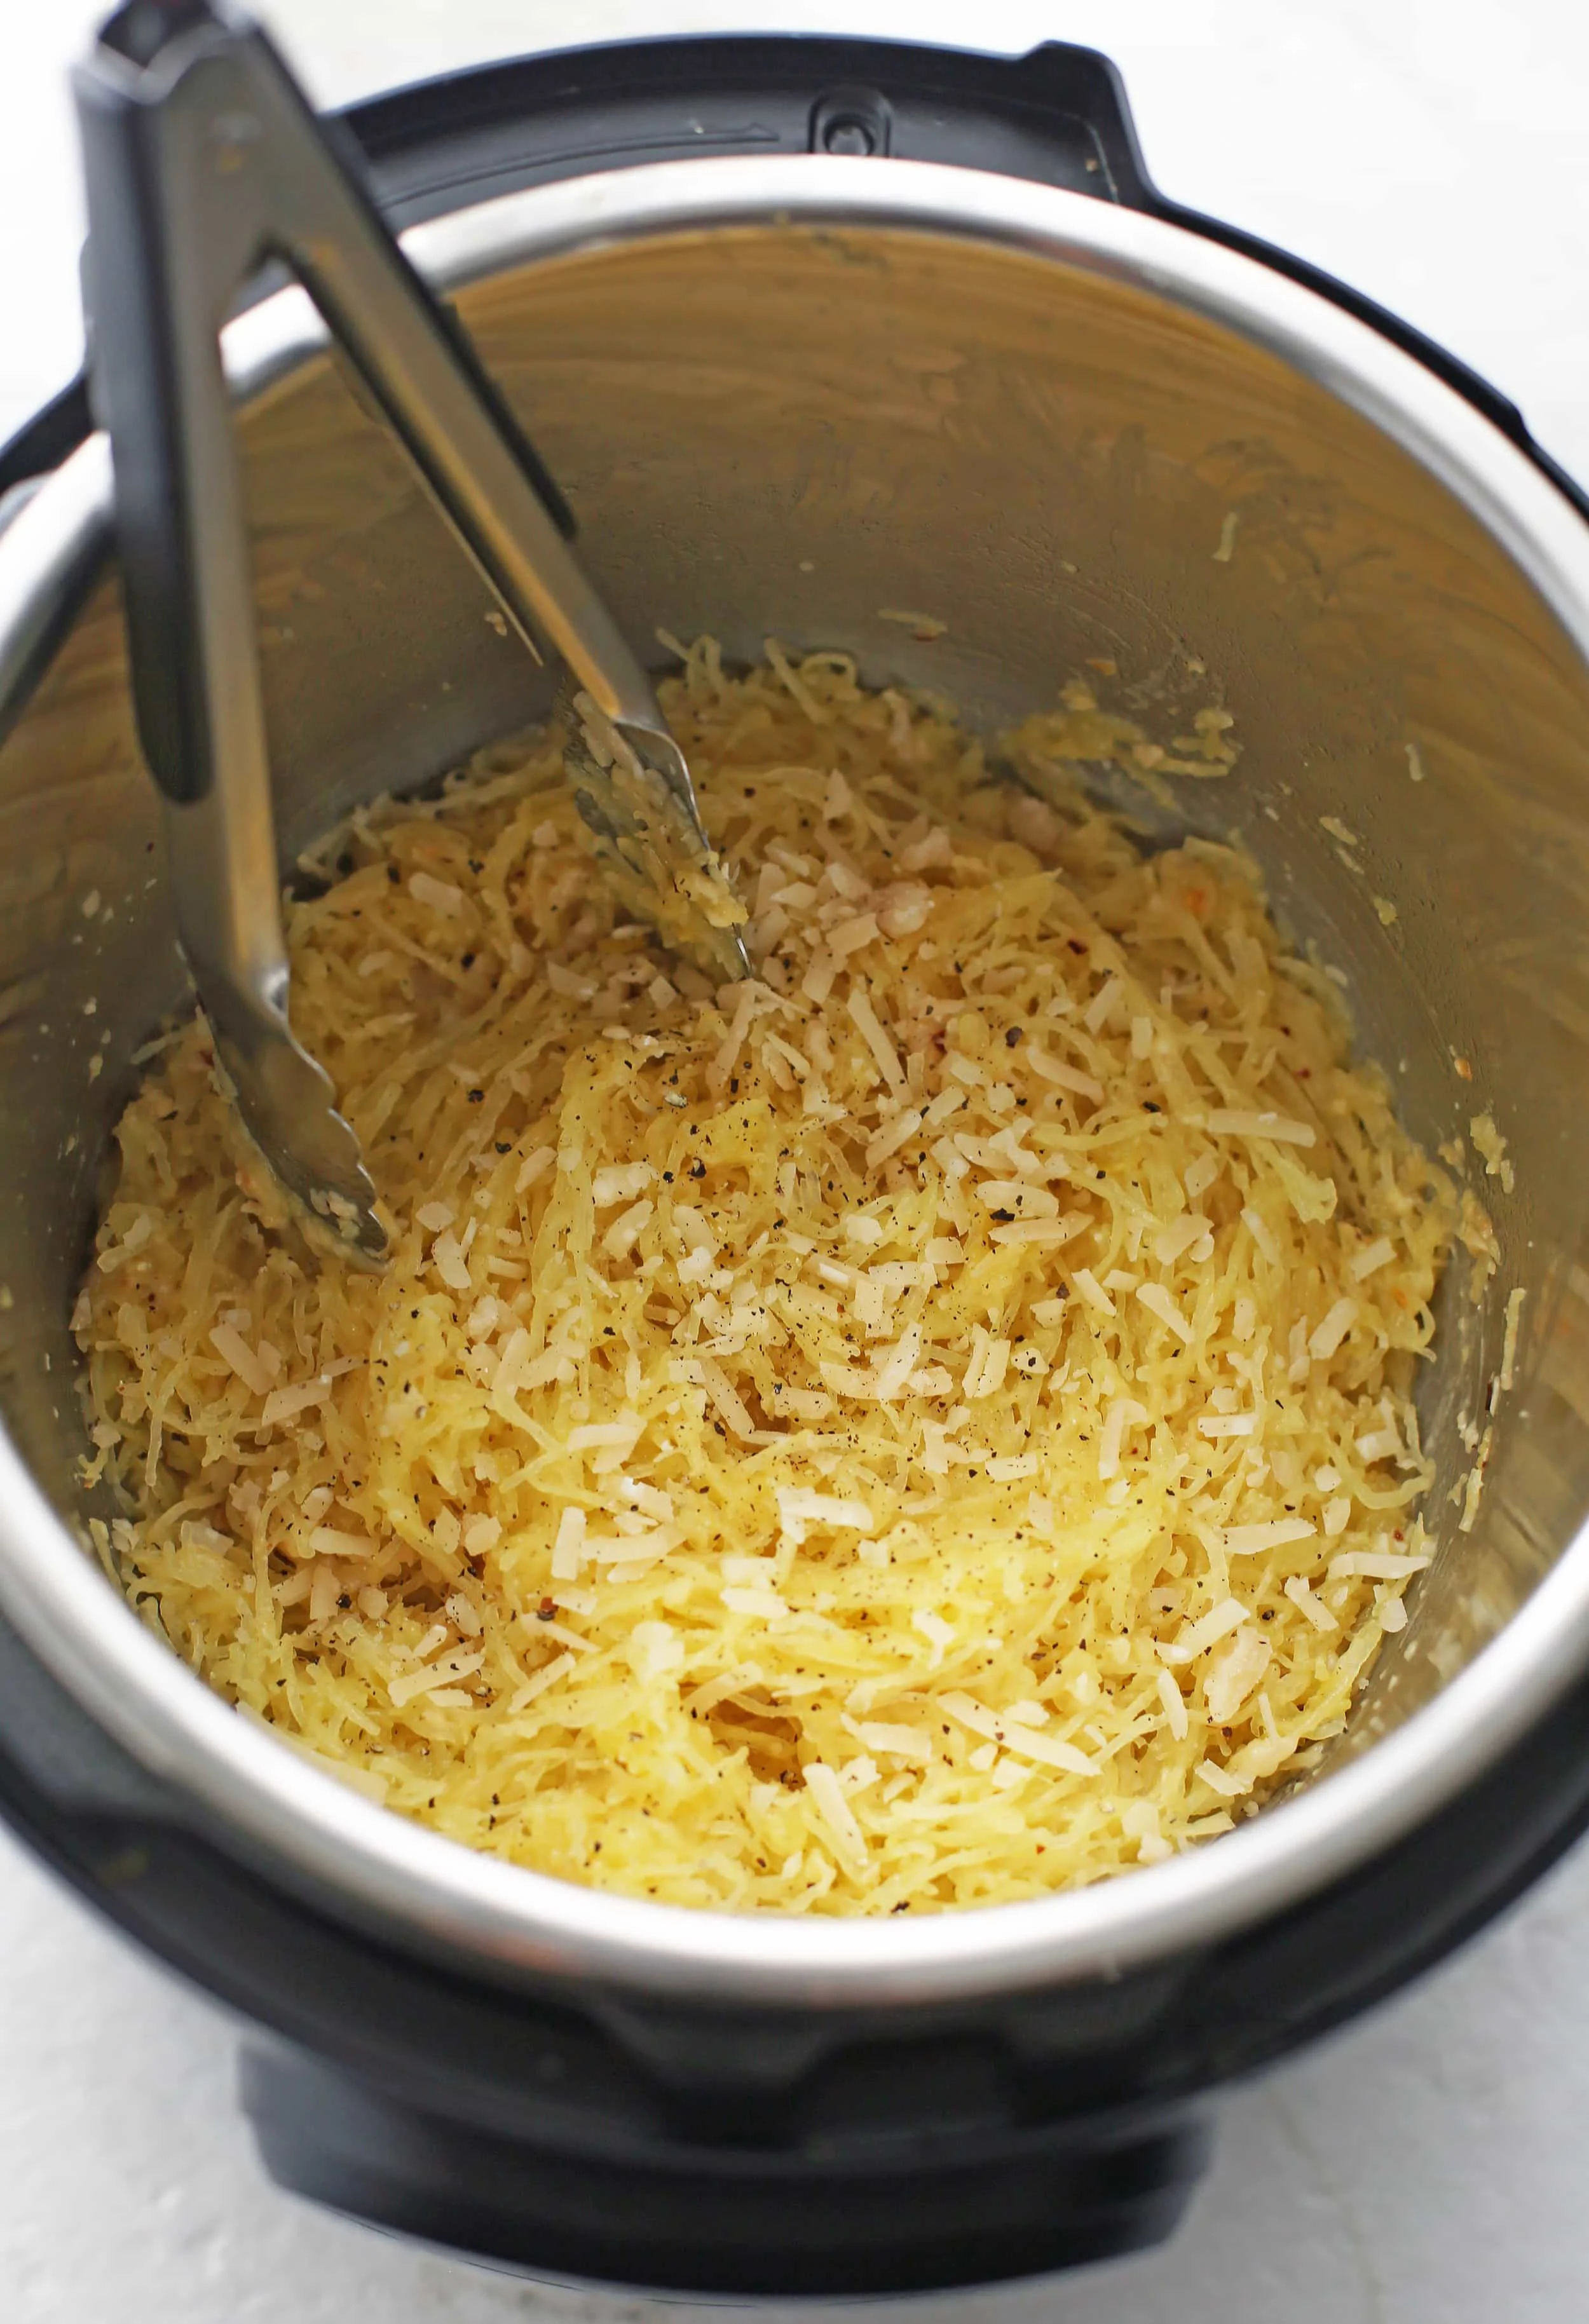 Cooked spaghetti squash mixed with olive oil, butter, spices, and garlic in the Instant Pot.